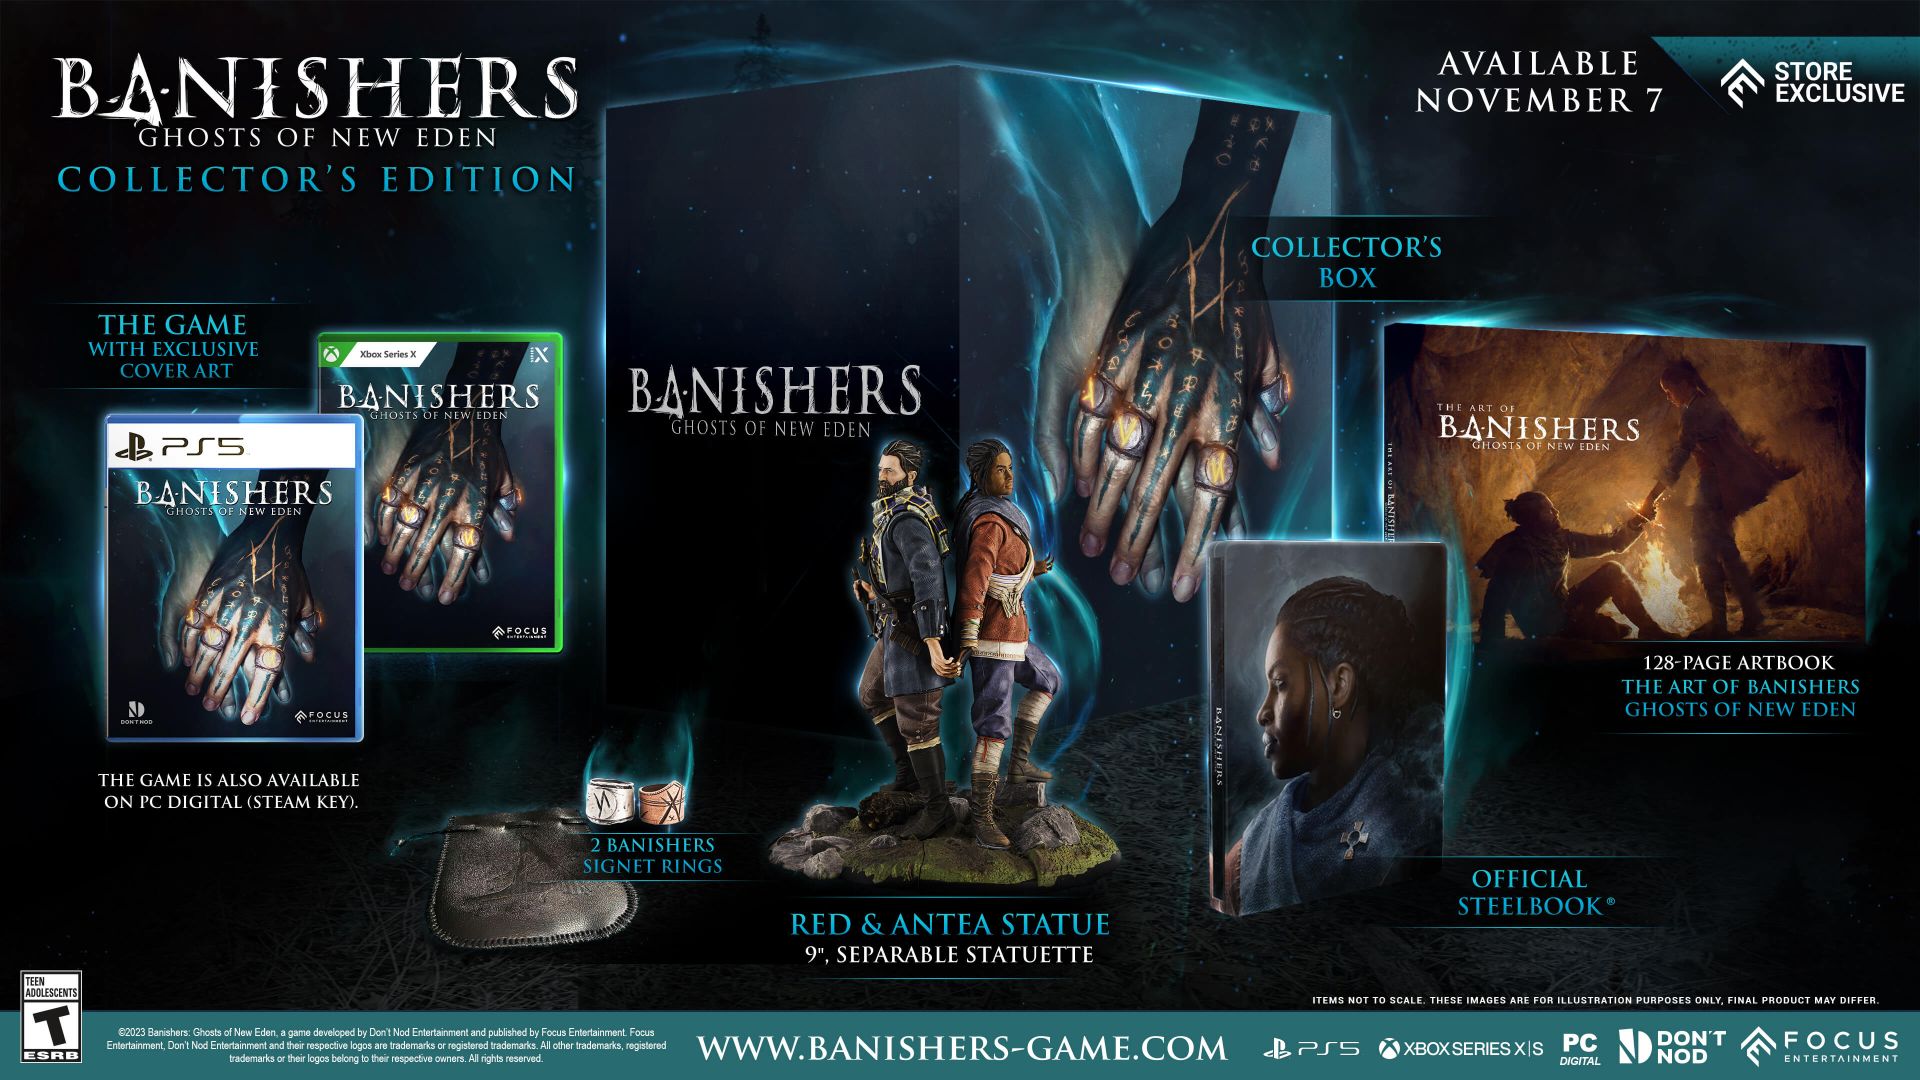 Banishers: Ghosts of New Eden Collector's Edition Contents